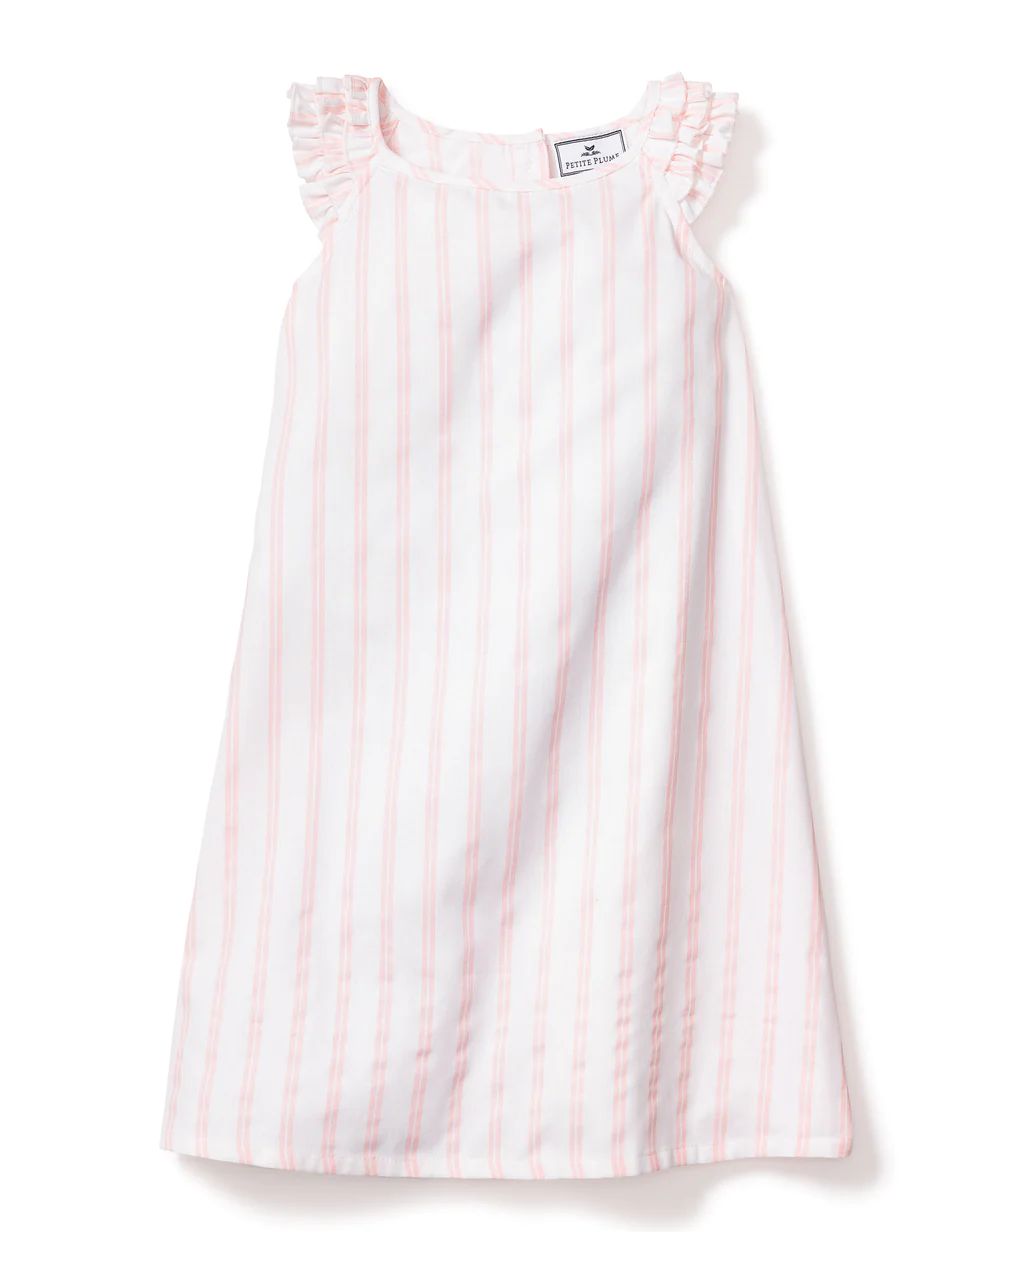 Girl's Twill Amelie Nightgown in Pink and White Stripe | Petite Plume